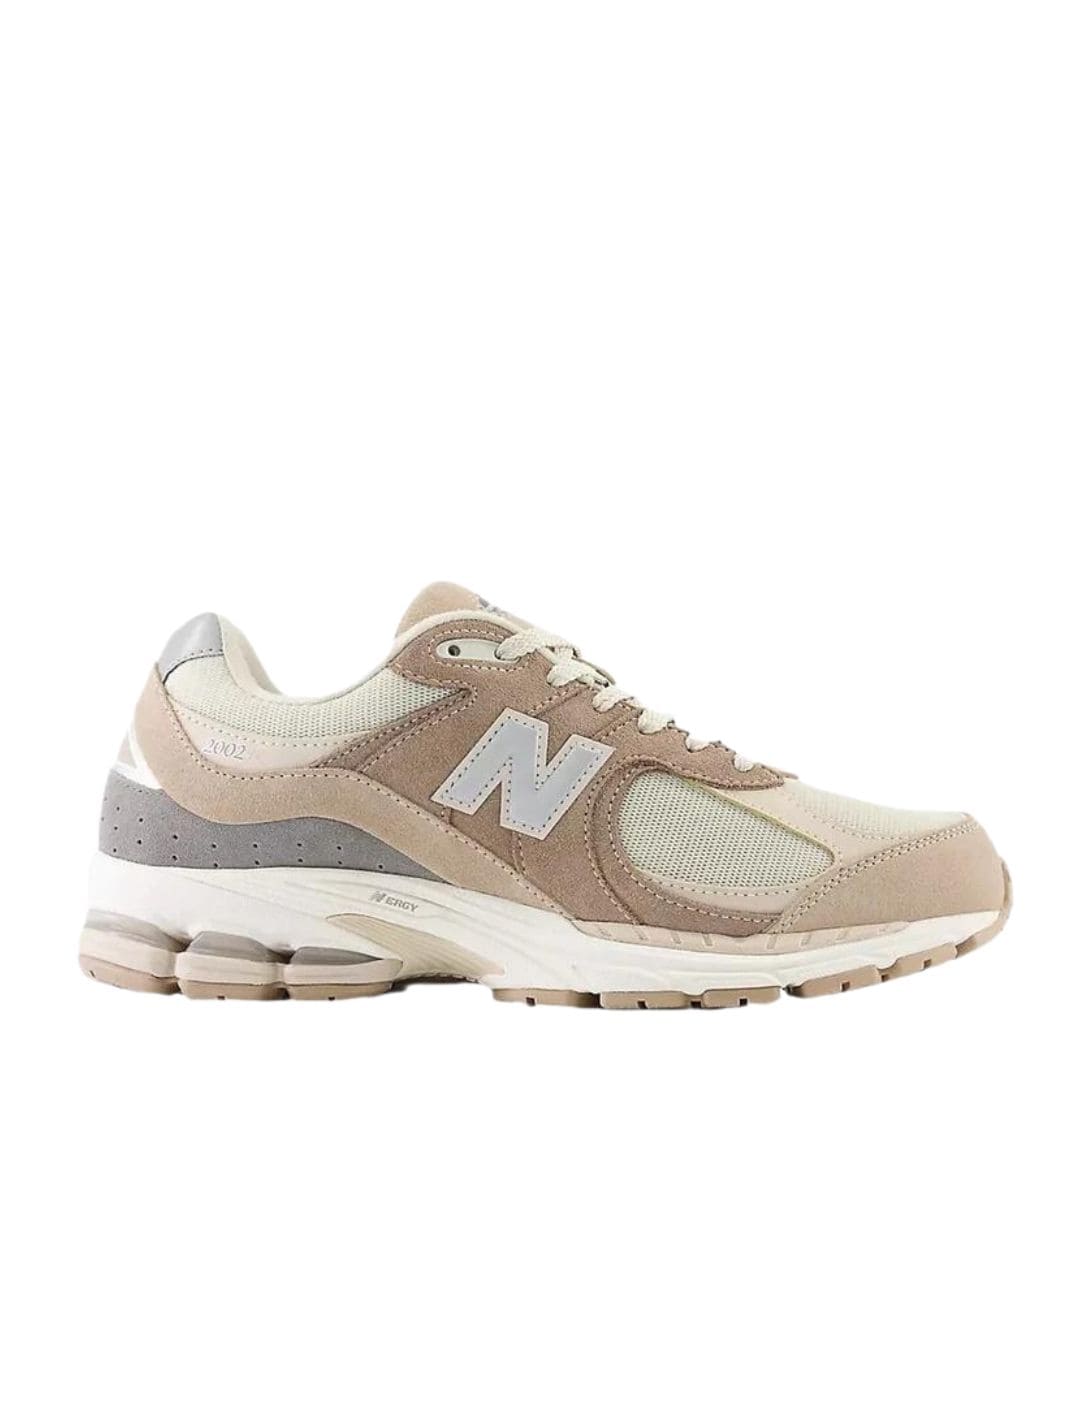 New Balance Shoes Sneakers | M2002RSI Driftwood Sandstone